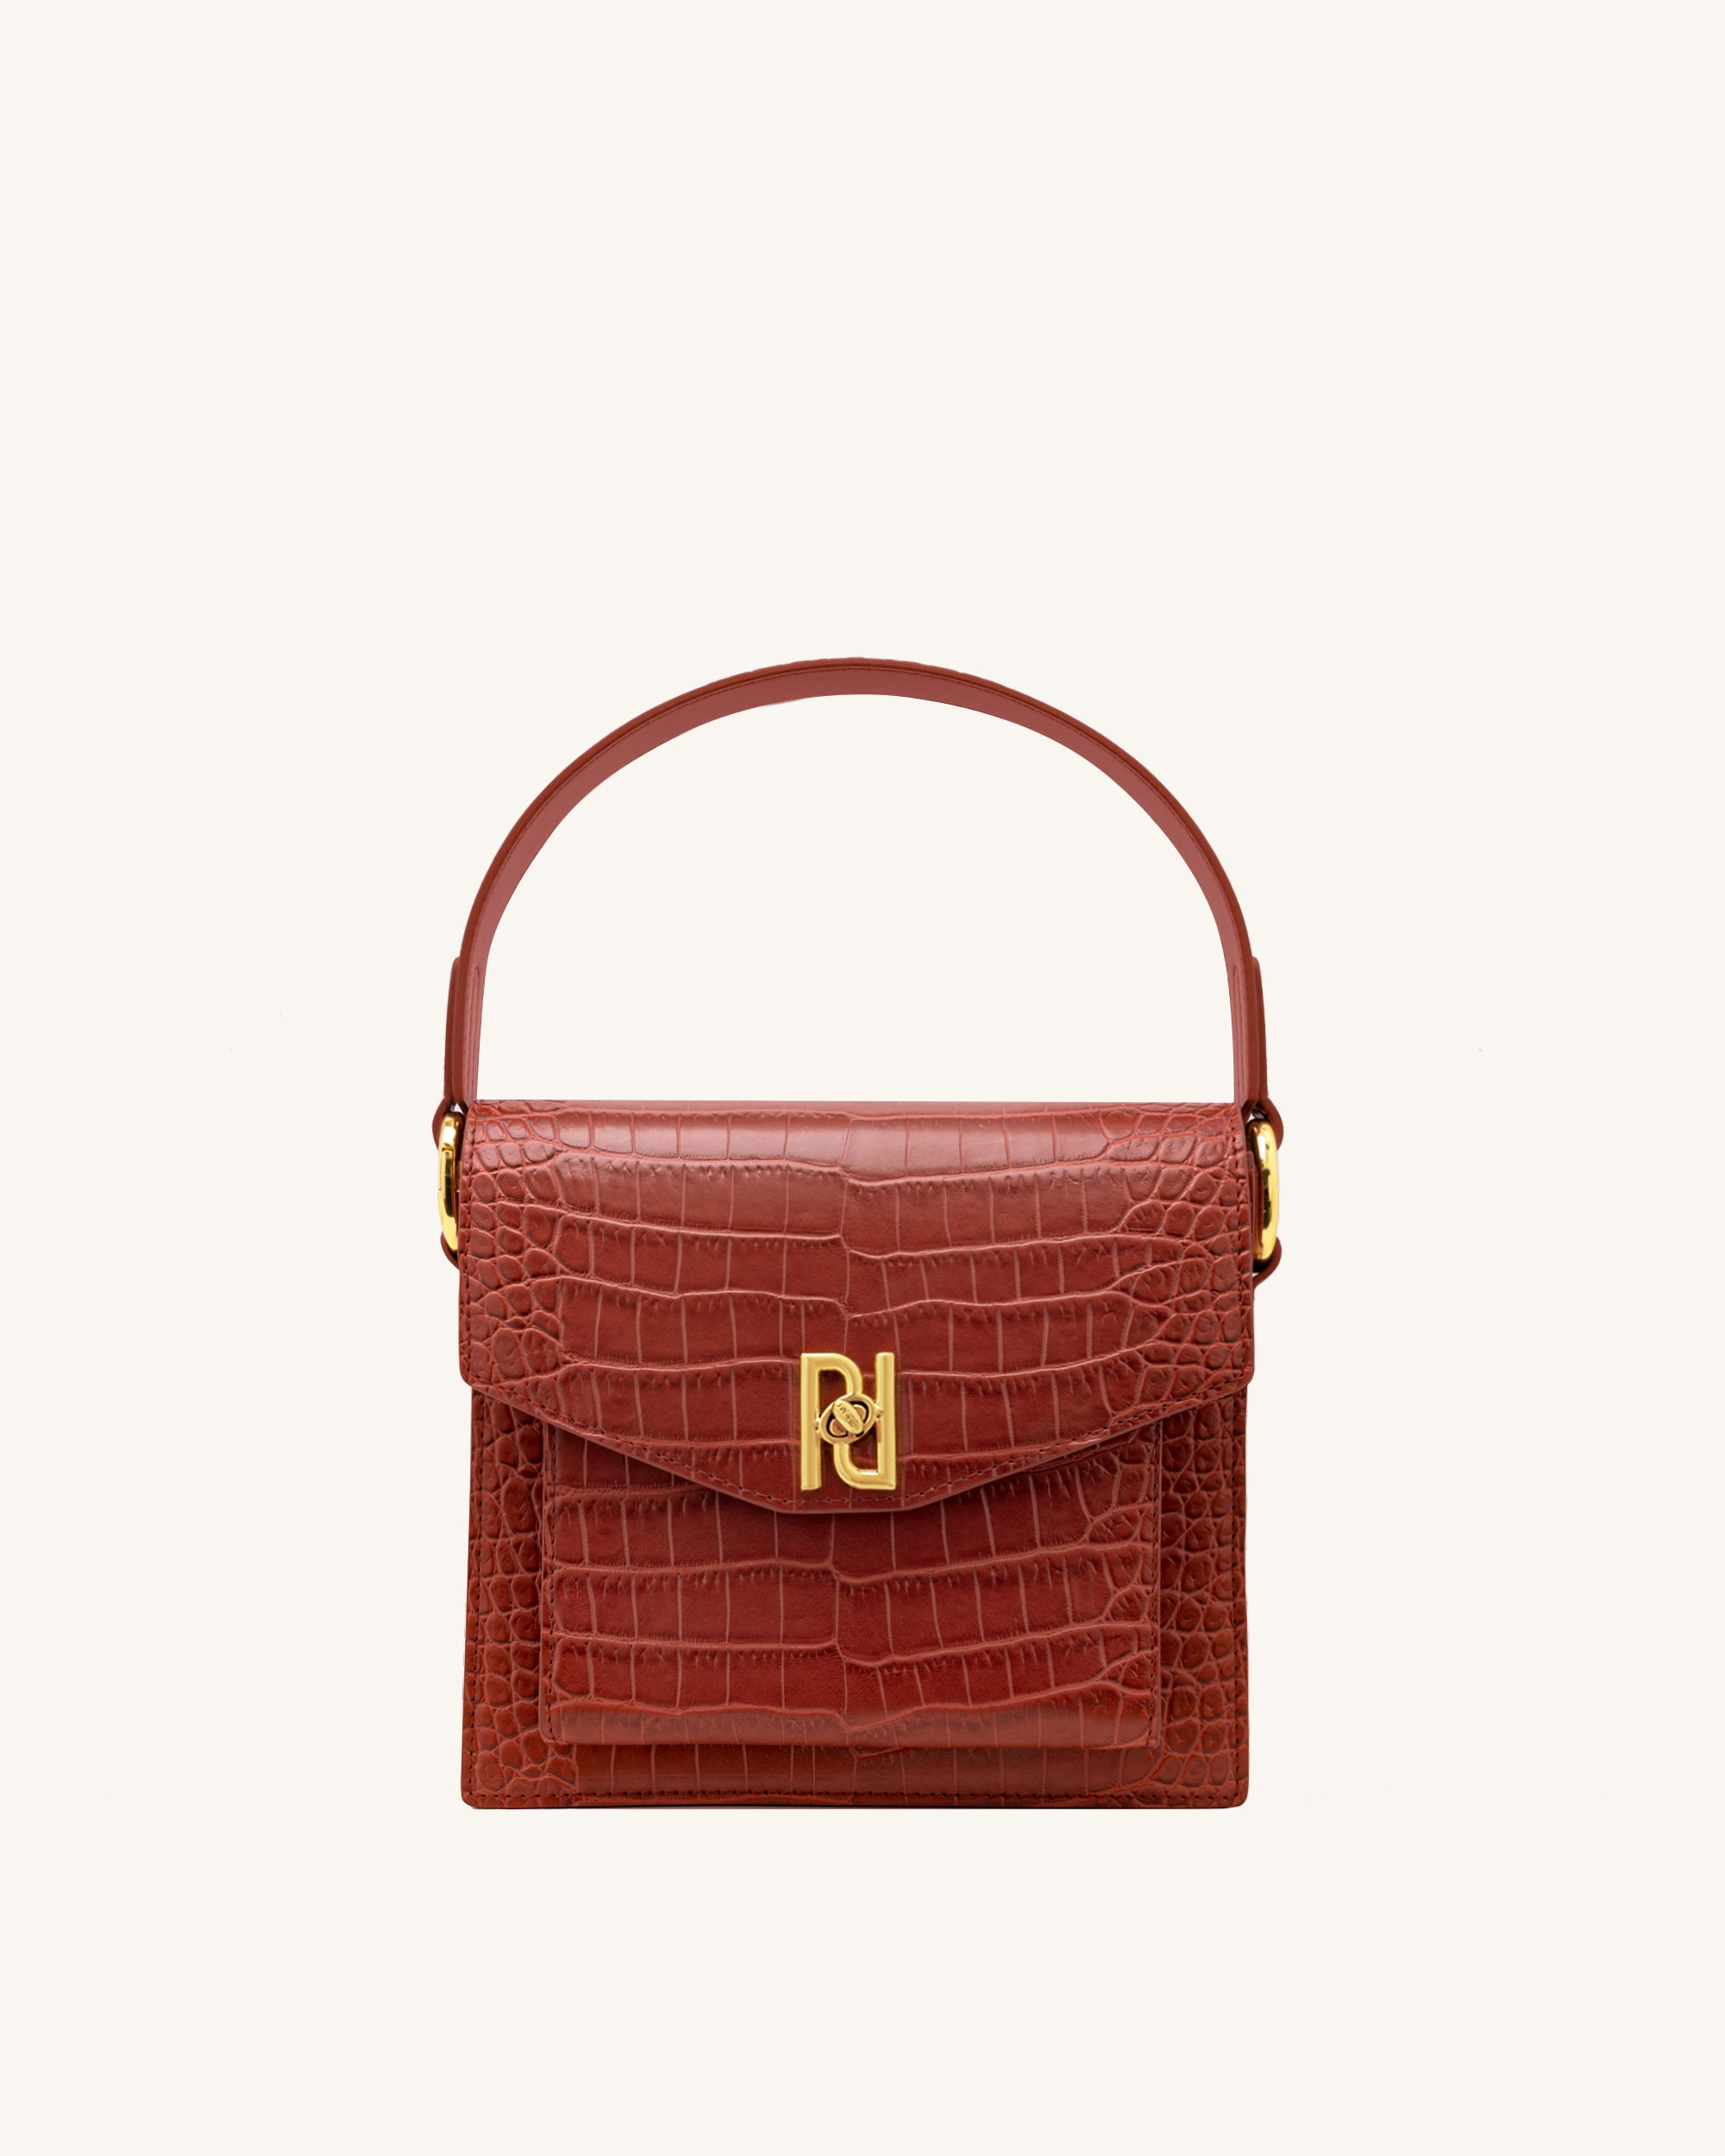 Lucy Bag - Wine Red Croc Online Shopping - JW Pei